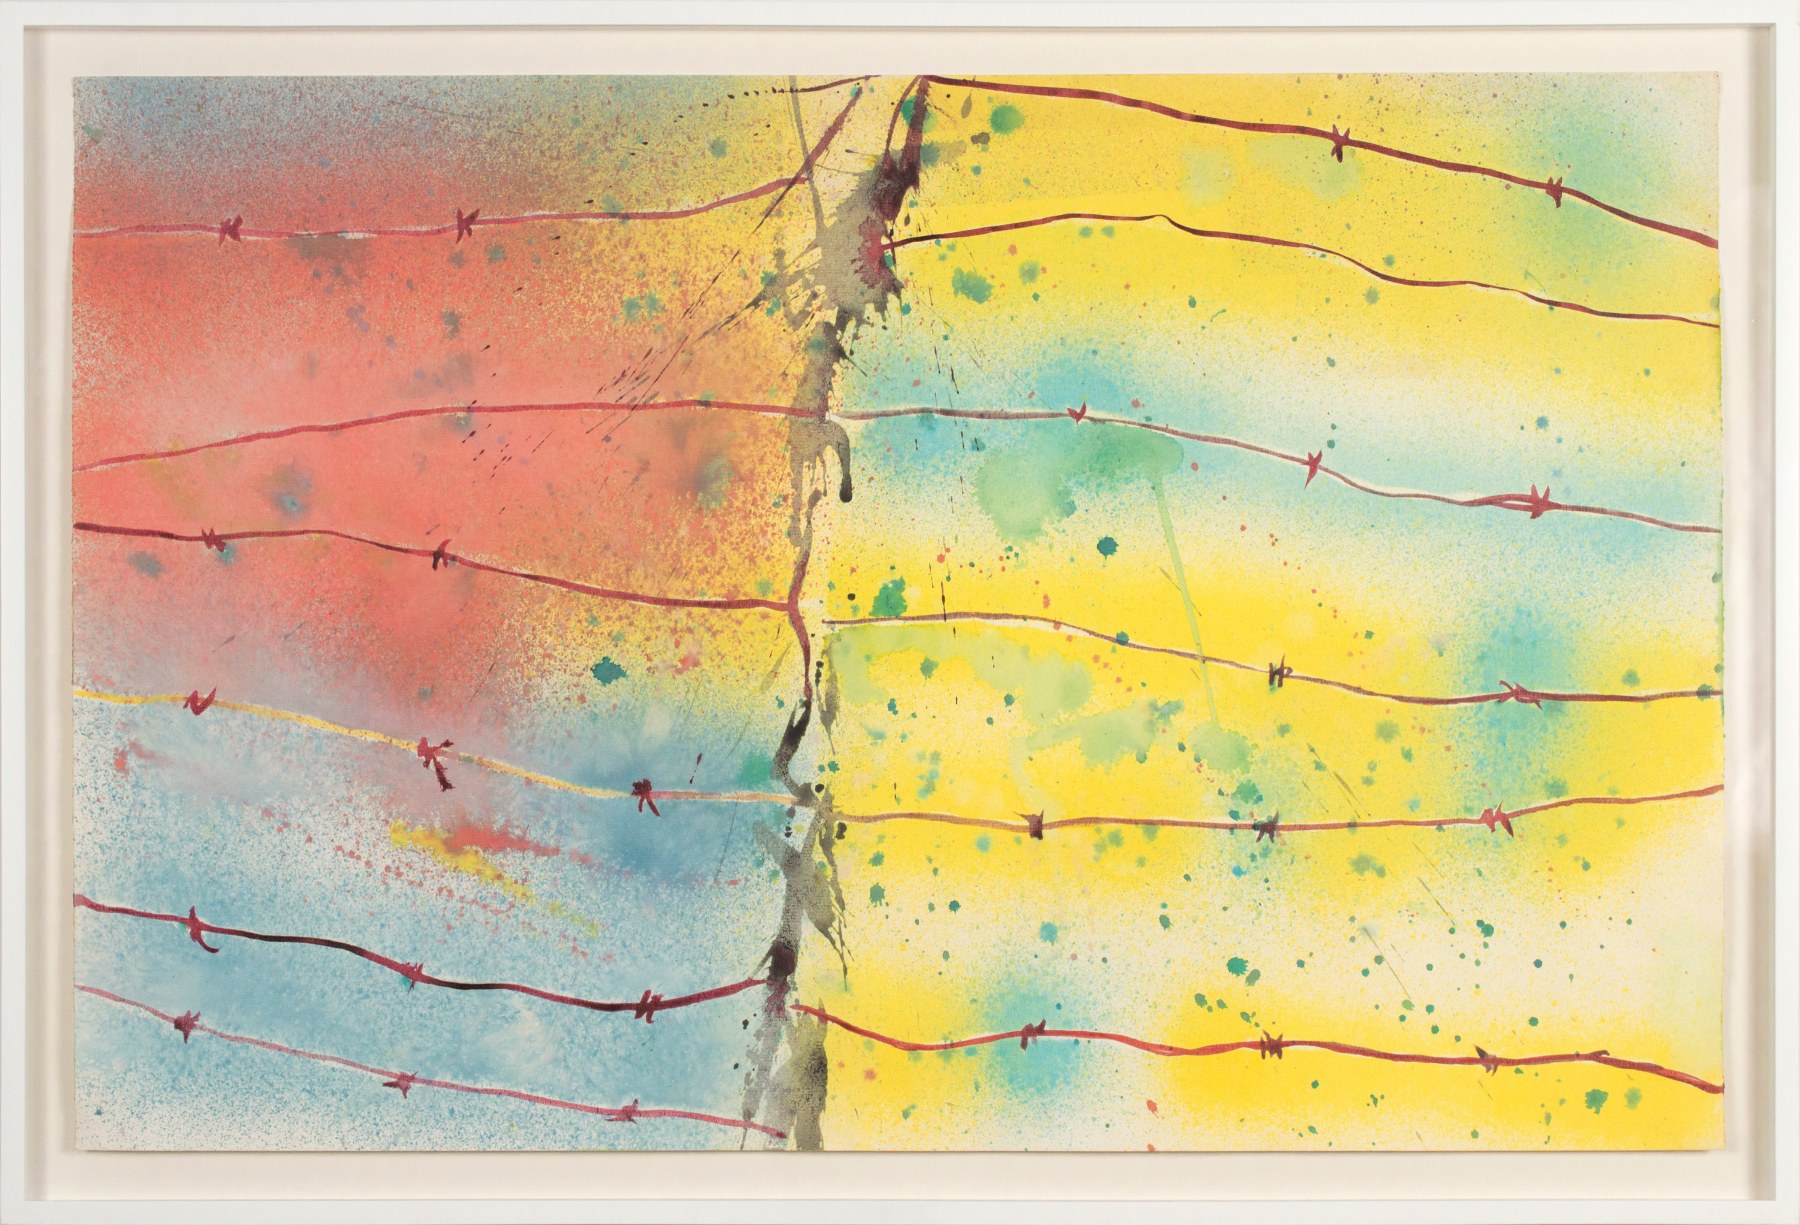 Untitled, c. 1974, Watercolor on paper